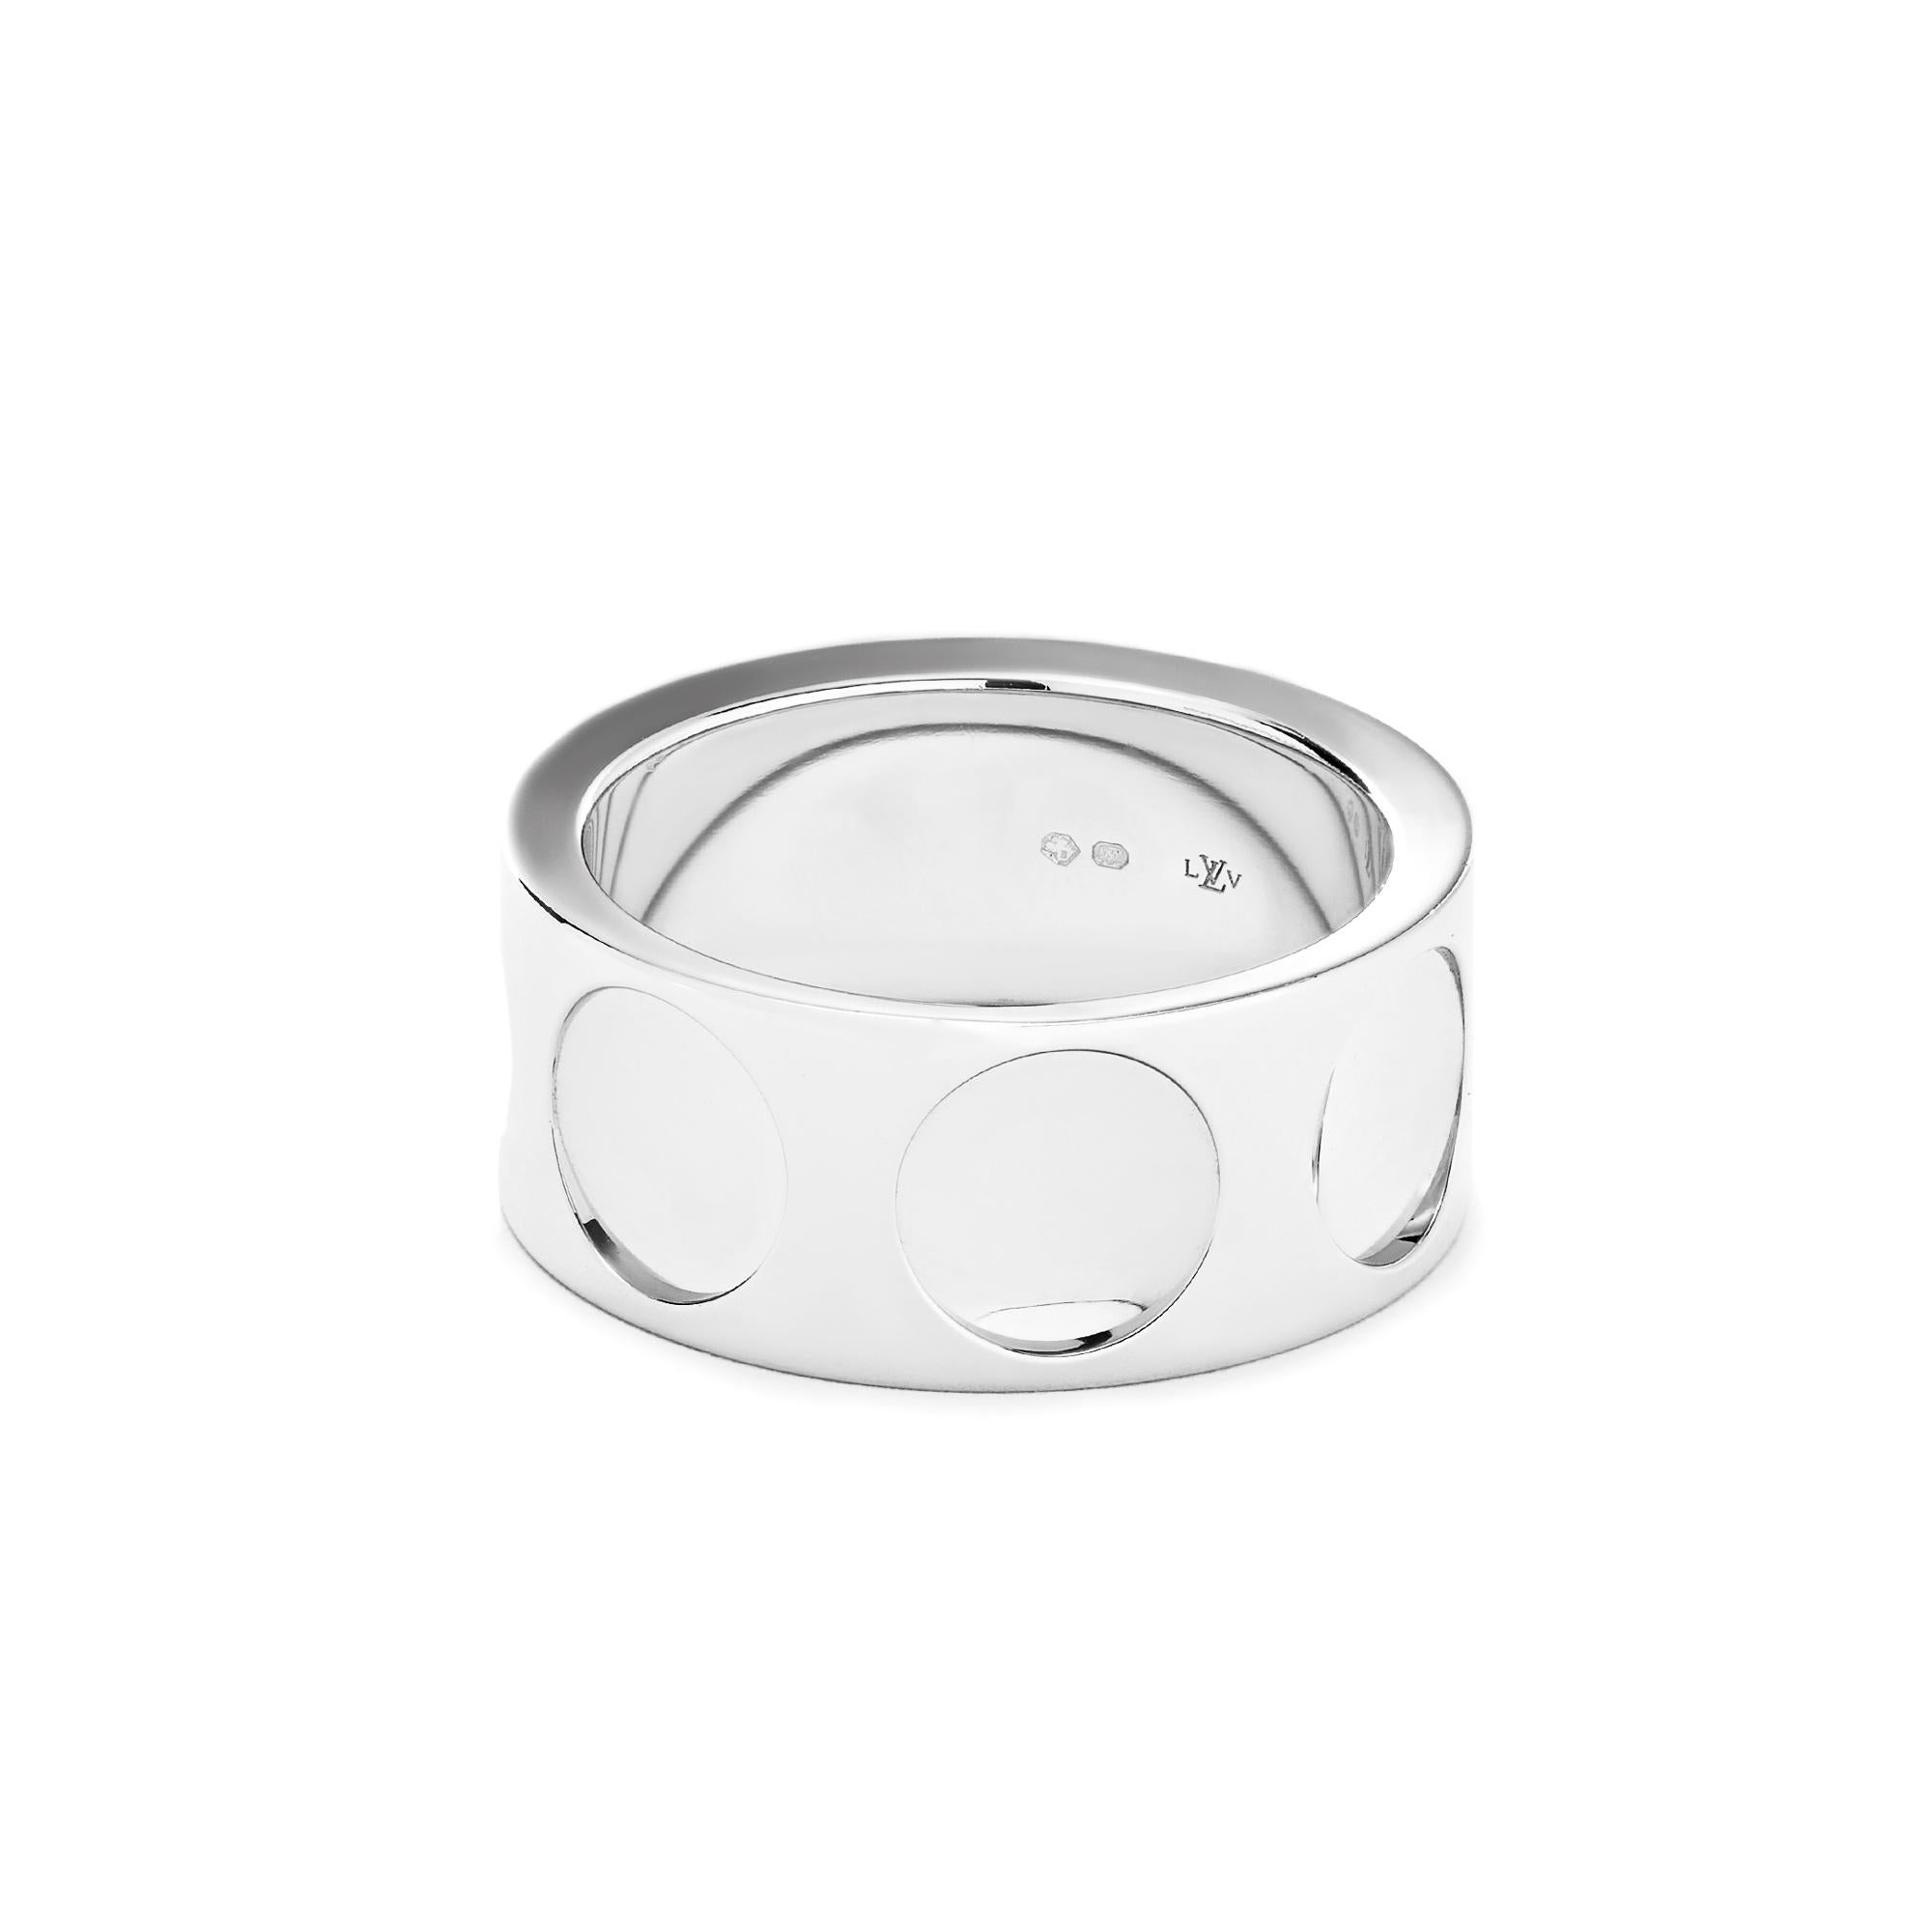 Symbolize your eternal commitment with the timeless elegance of the Louis Vuitton White Gold Wedding Band. Crafted from luxurious 18k white gold, this band epitomizes sophistication and refinement.
Designed with meticulous attention to detail, this